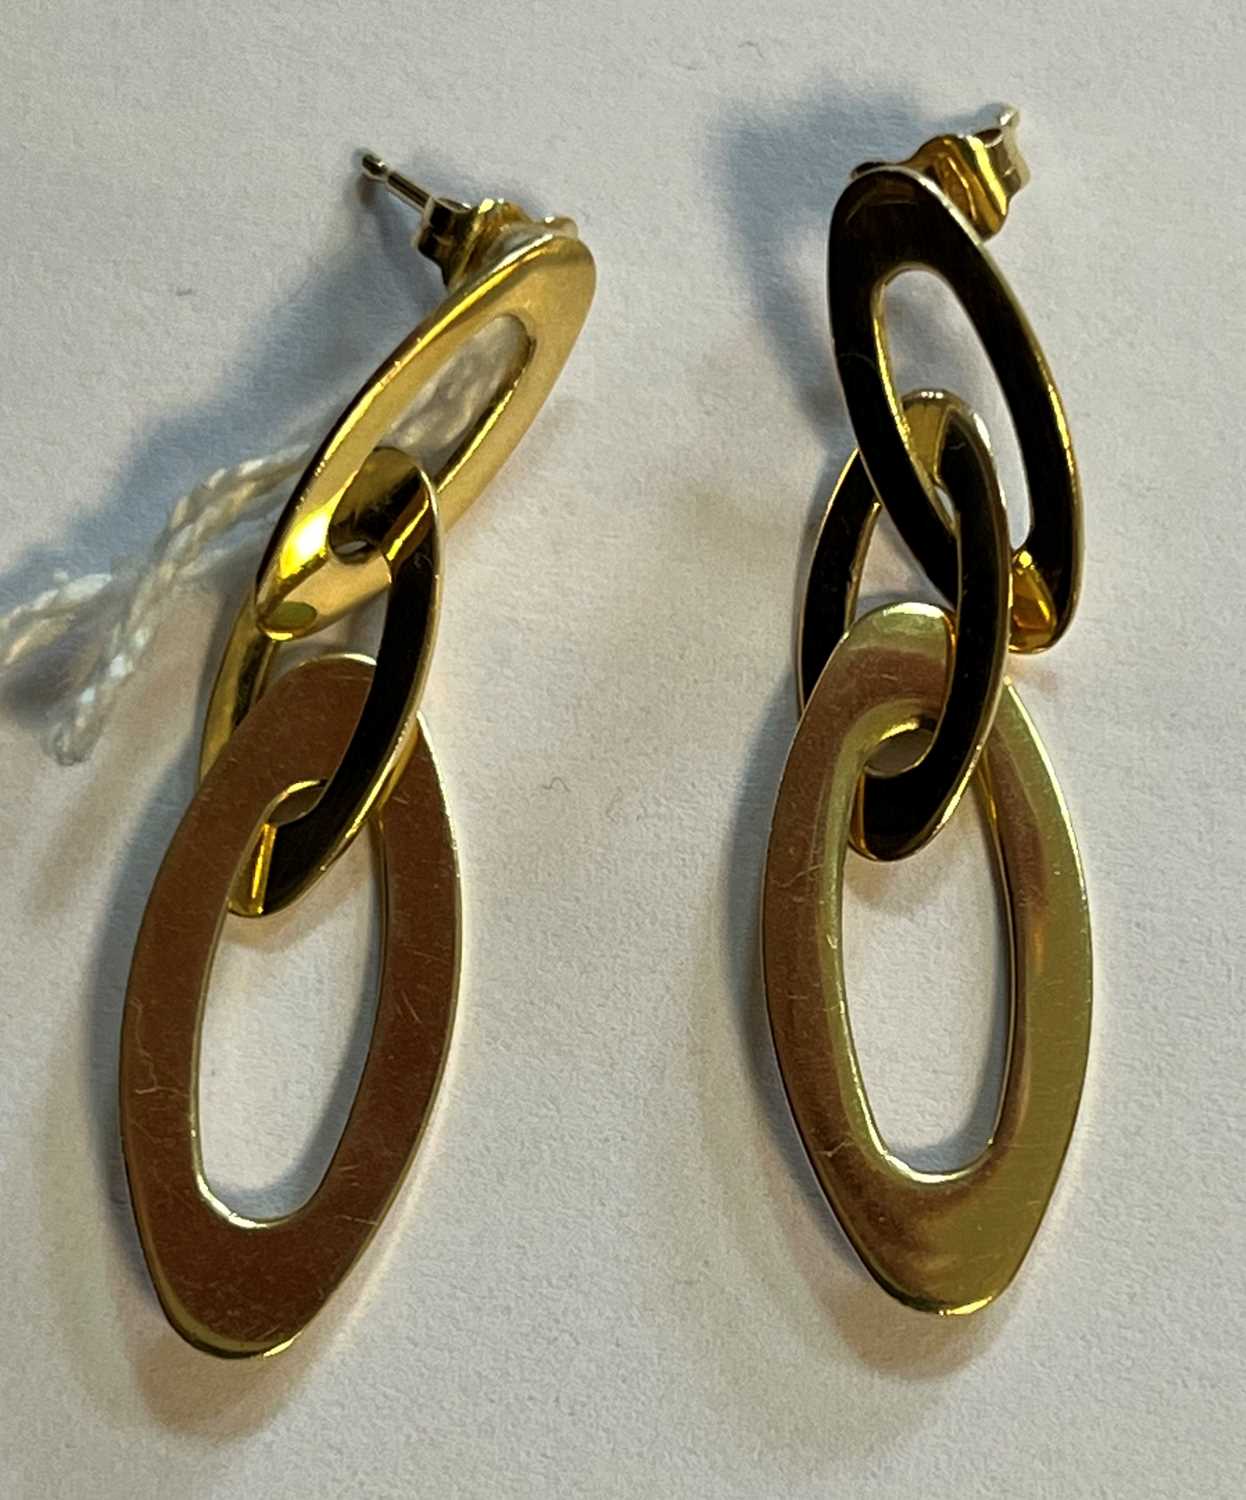 A pair of 18ct gold 'Chic & Shine' drop earrings, by Roberto Coin, - Image 5 of 5